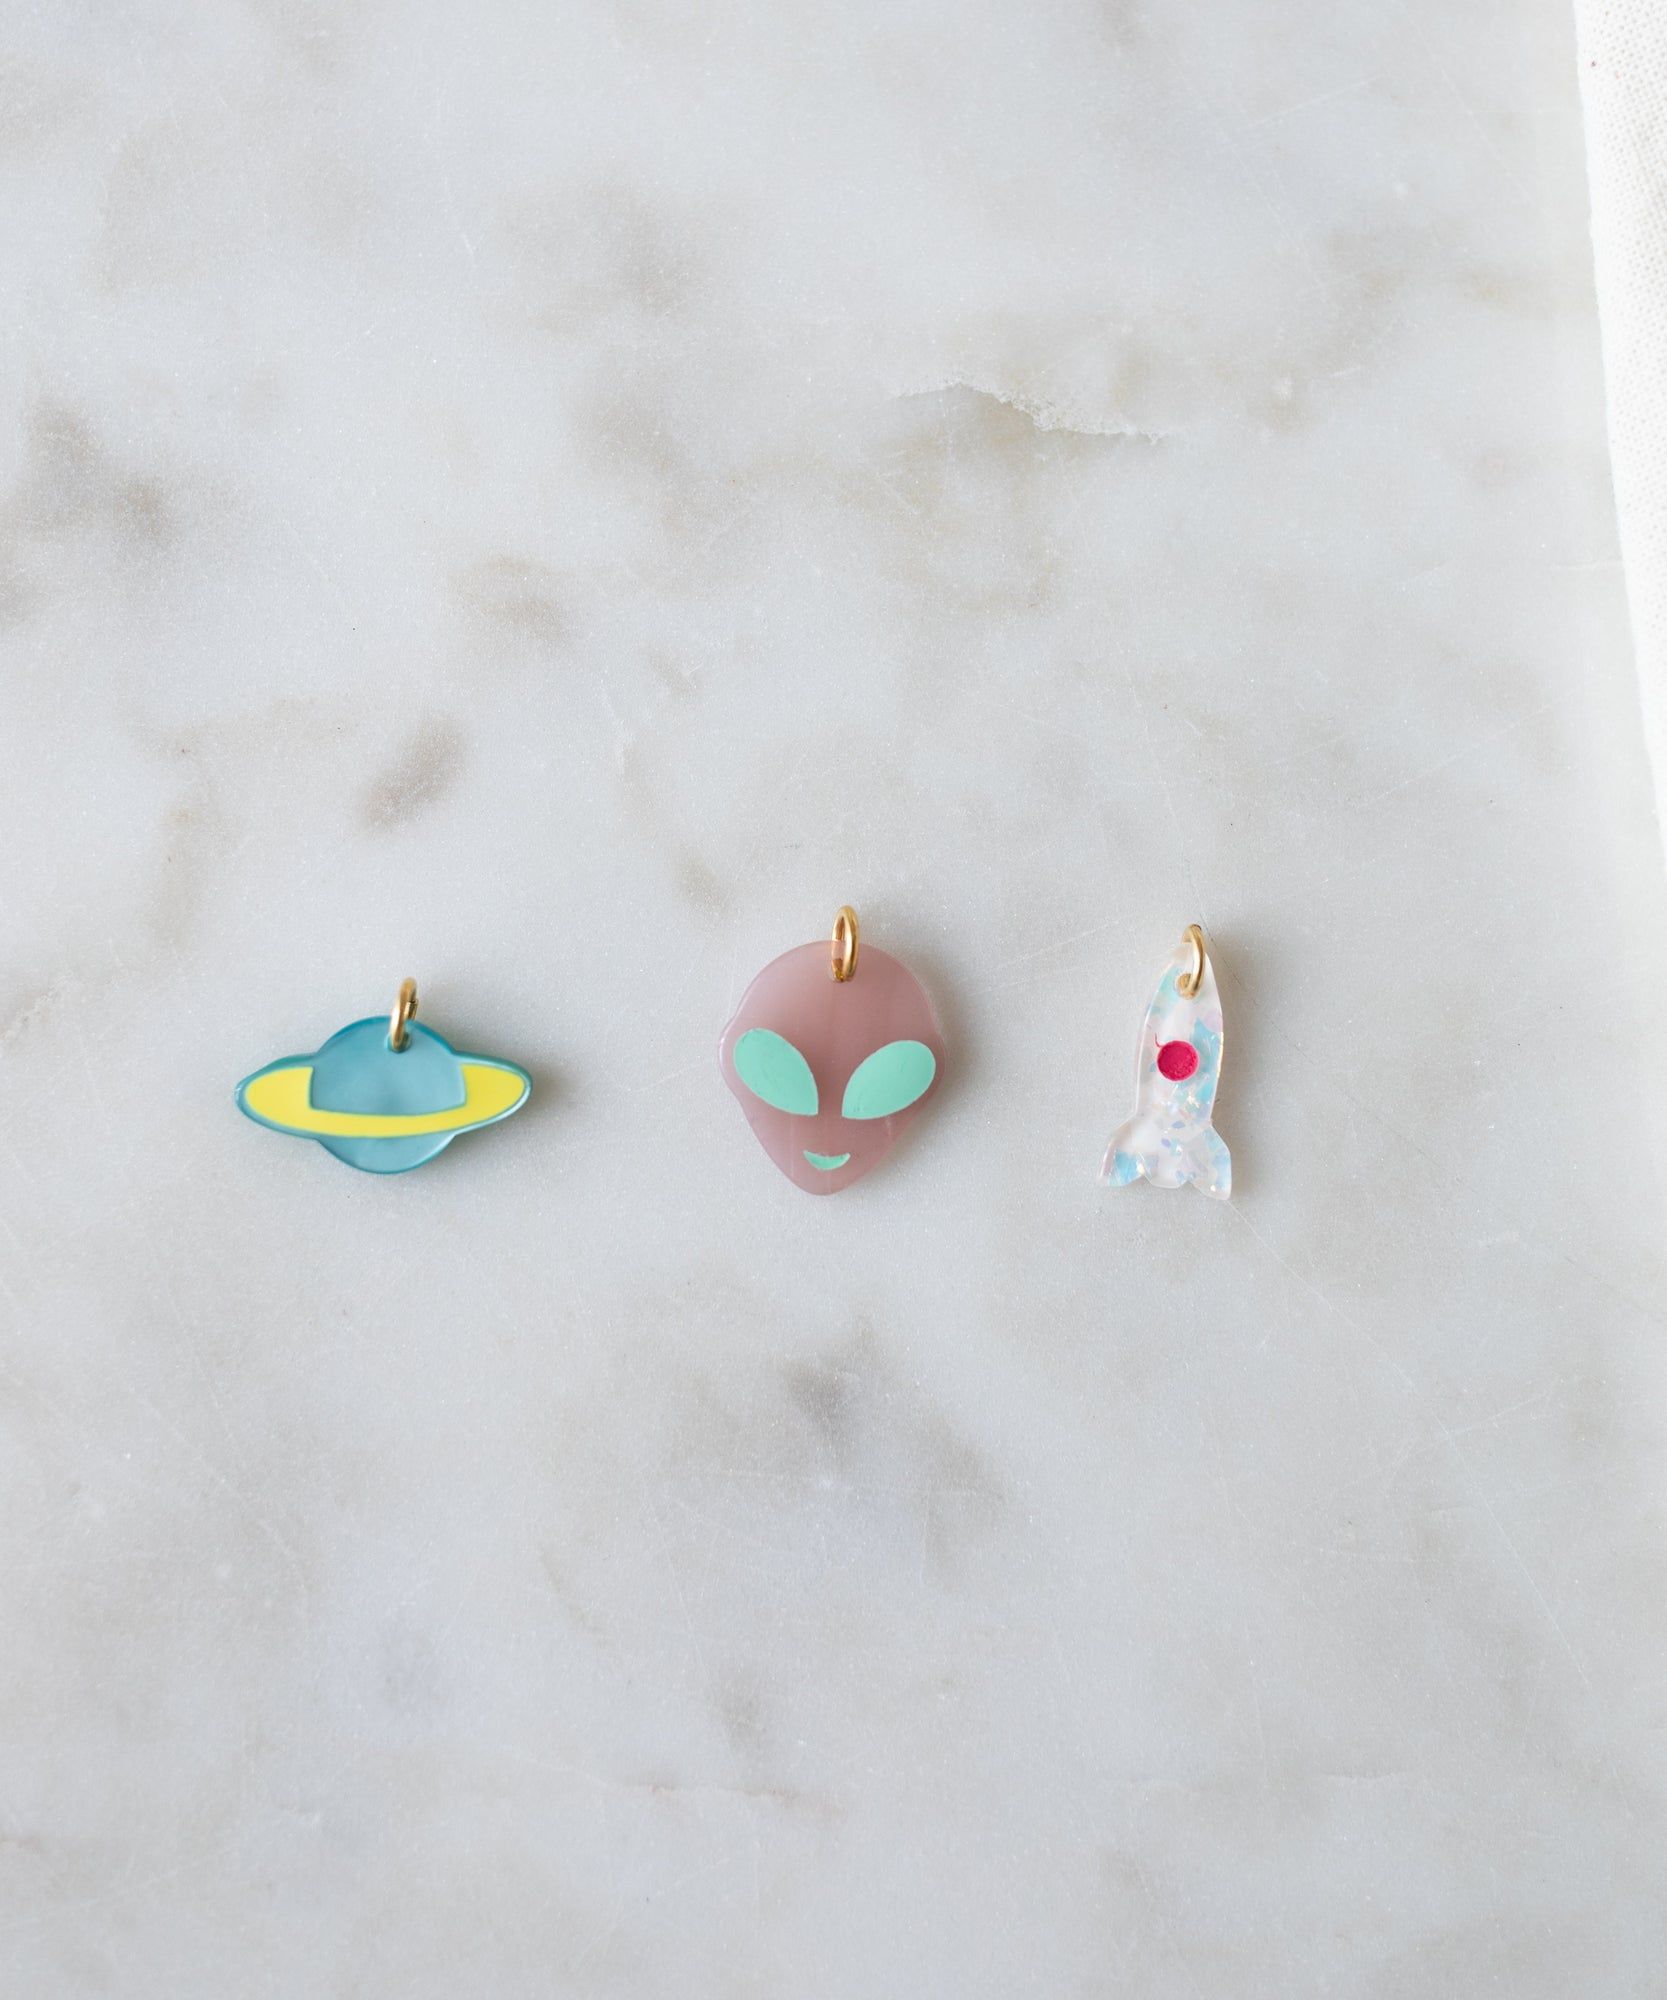 Three Venus Charm keychains with designs of a UFO, an alien face, and a ghost, displayed on a marble surface perfect for DIY jewelry enthusiasts from WALD World.